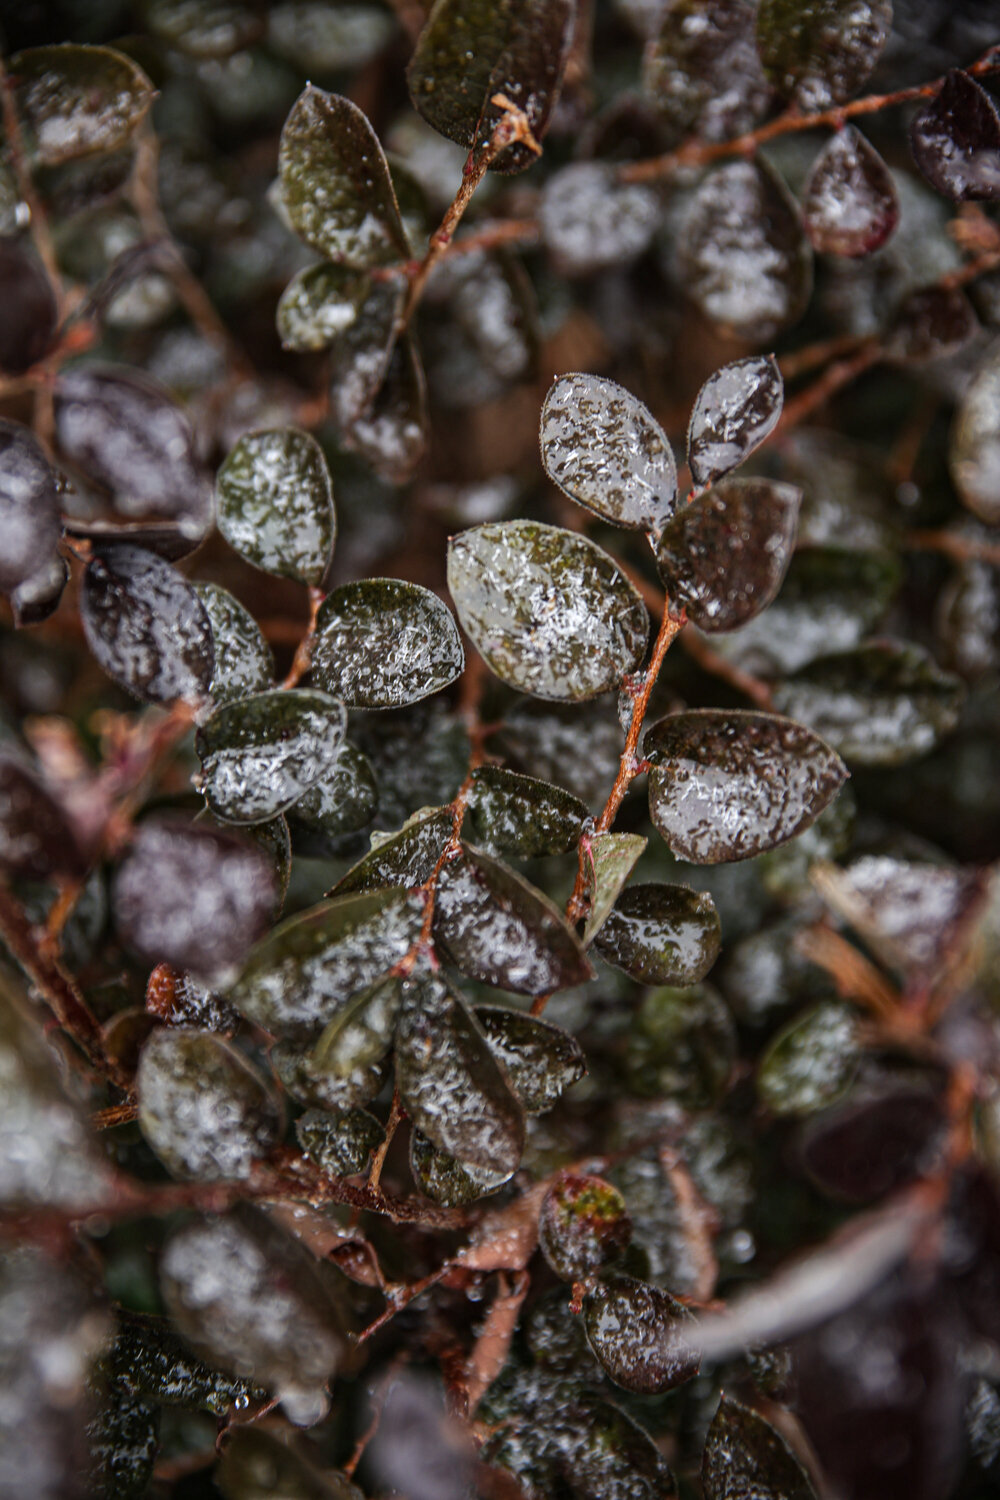 Ice sticking to leaves on a plant the morning of Jan. 16.